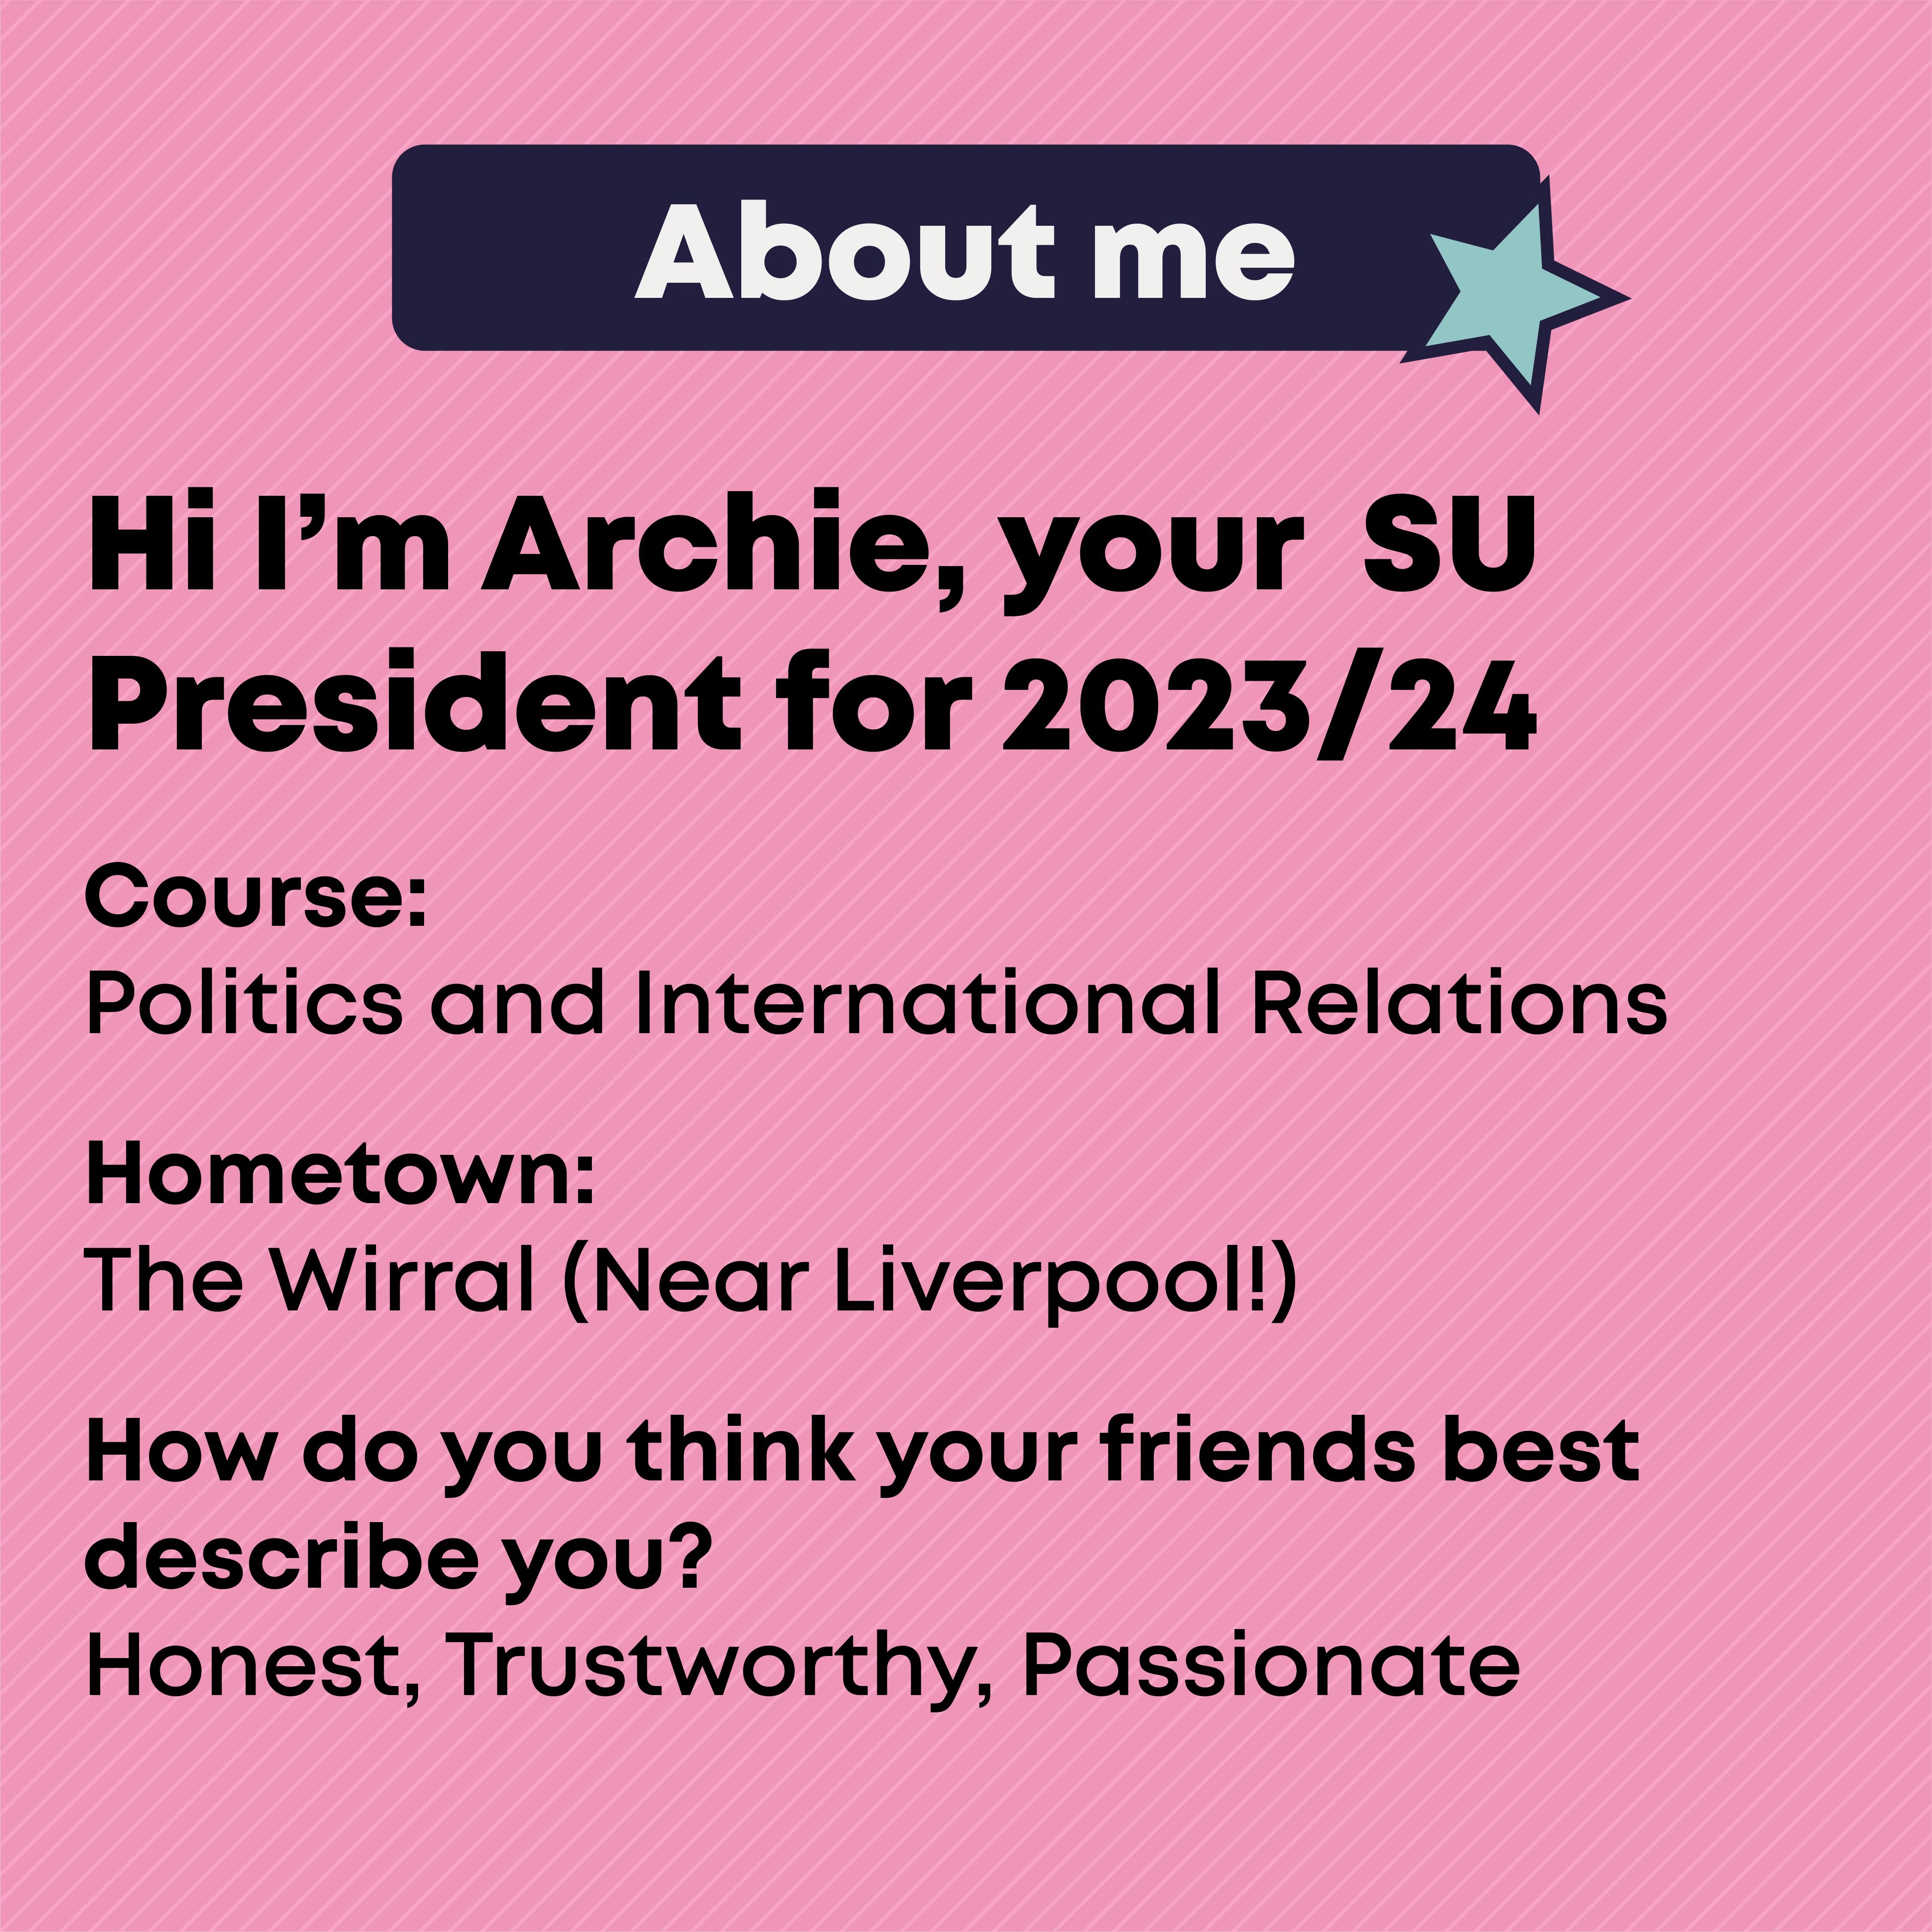 About  Course: Politics and International Relations  Hometown: the Wirral (near Liverpool!)  How do you think your friends best describe you?: Honest, Trustworthy, Passionate